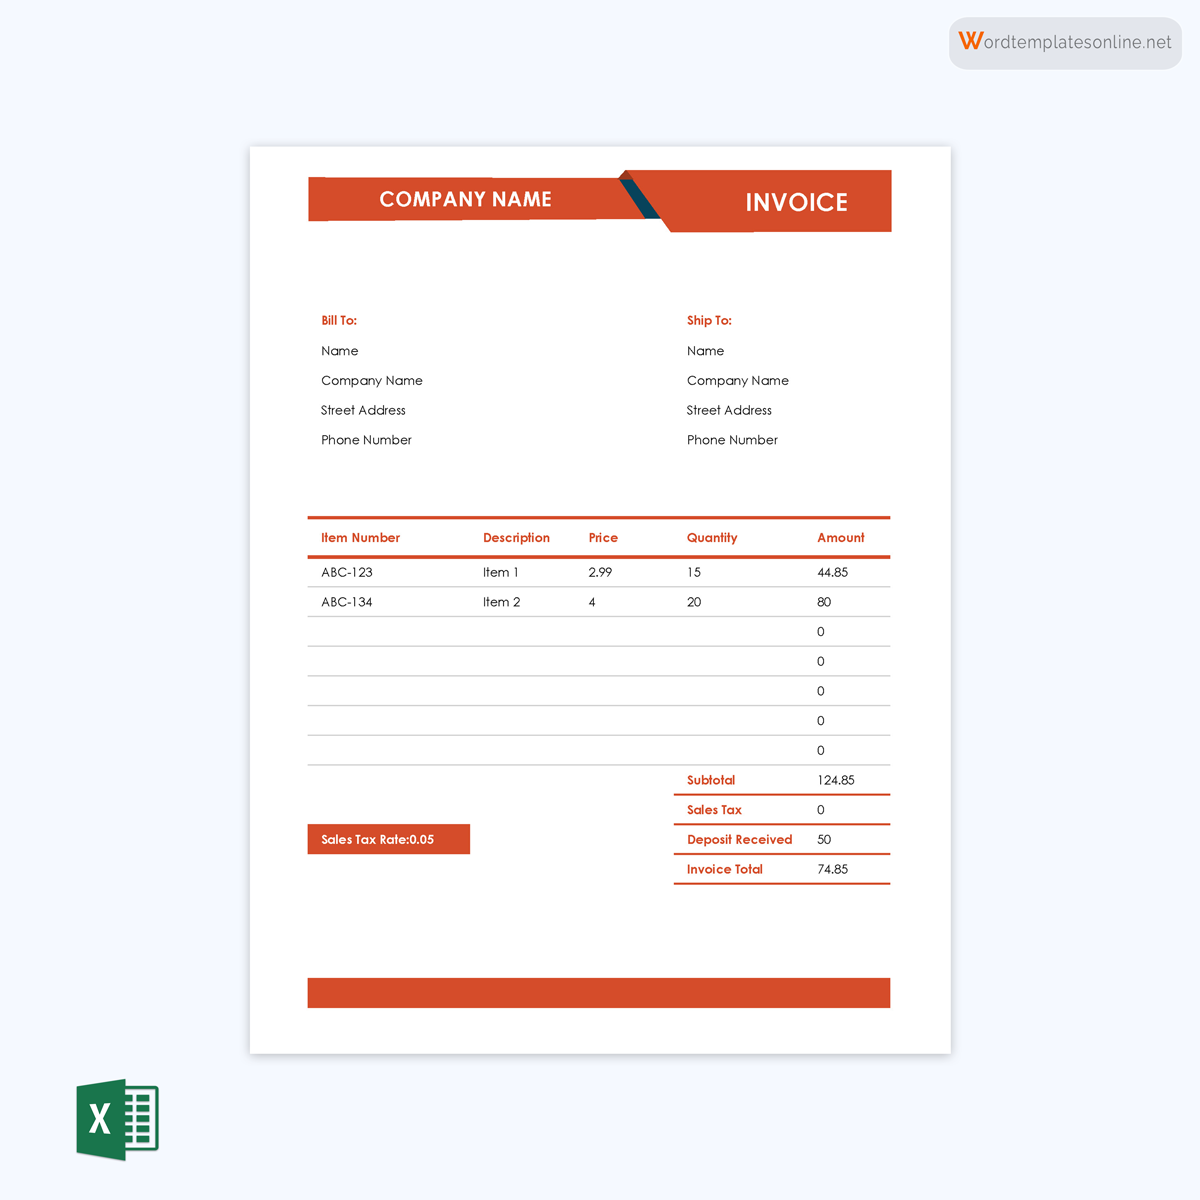 Editable invoice form with word and excel compatibility